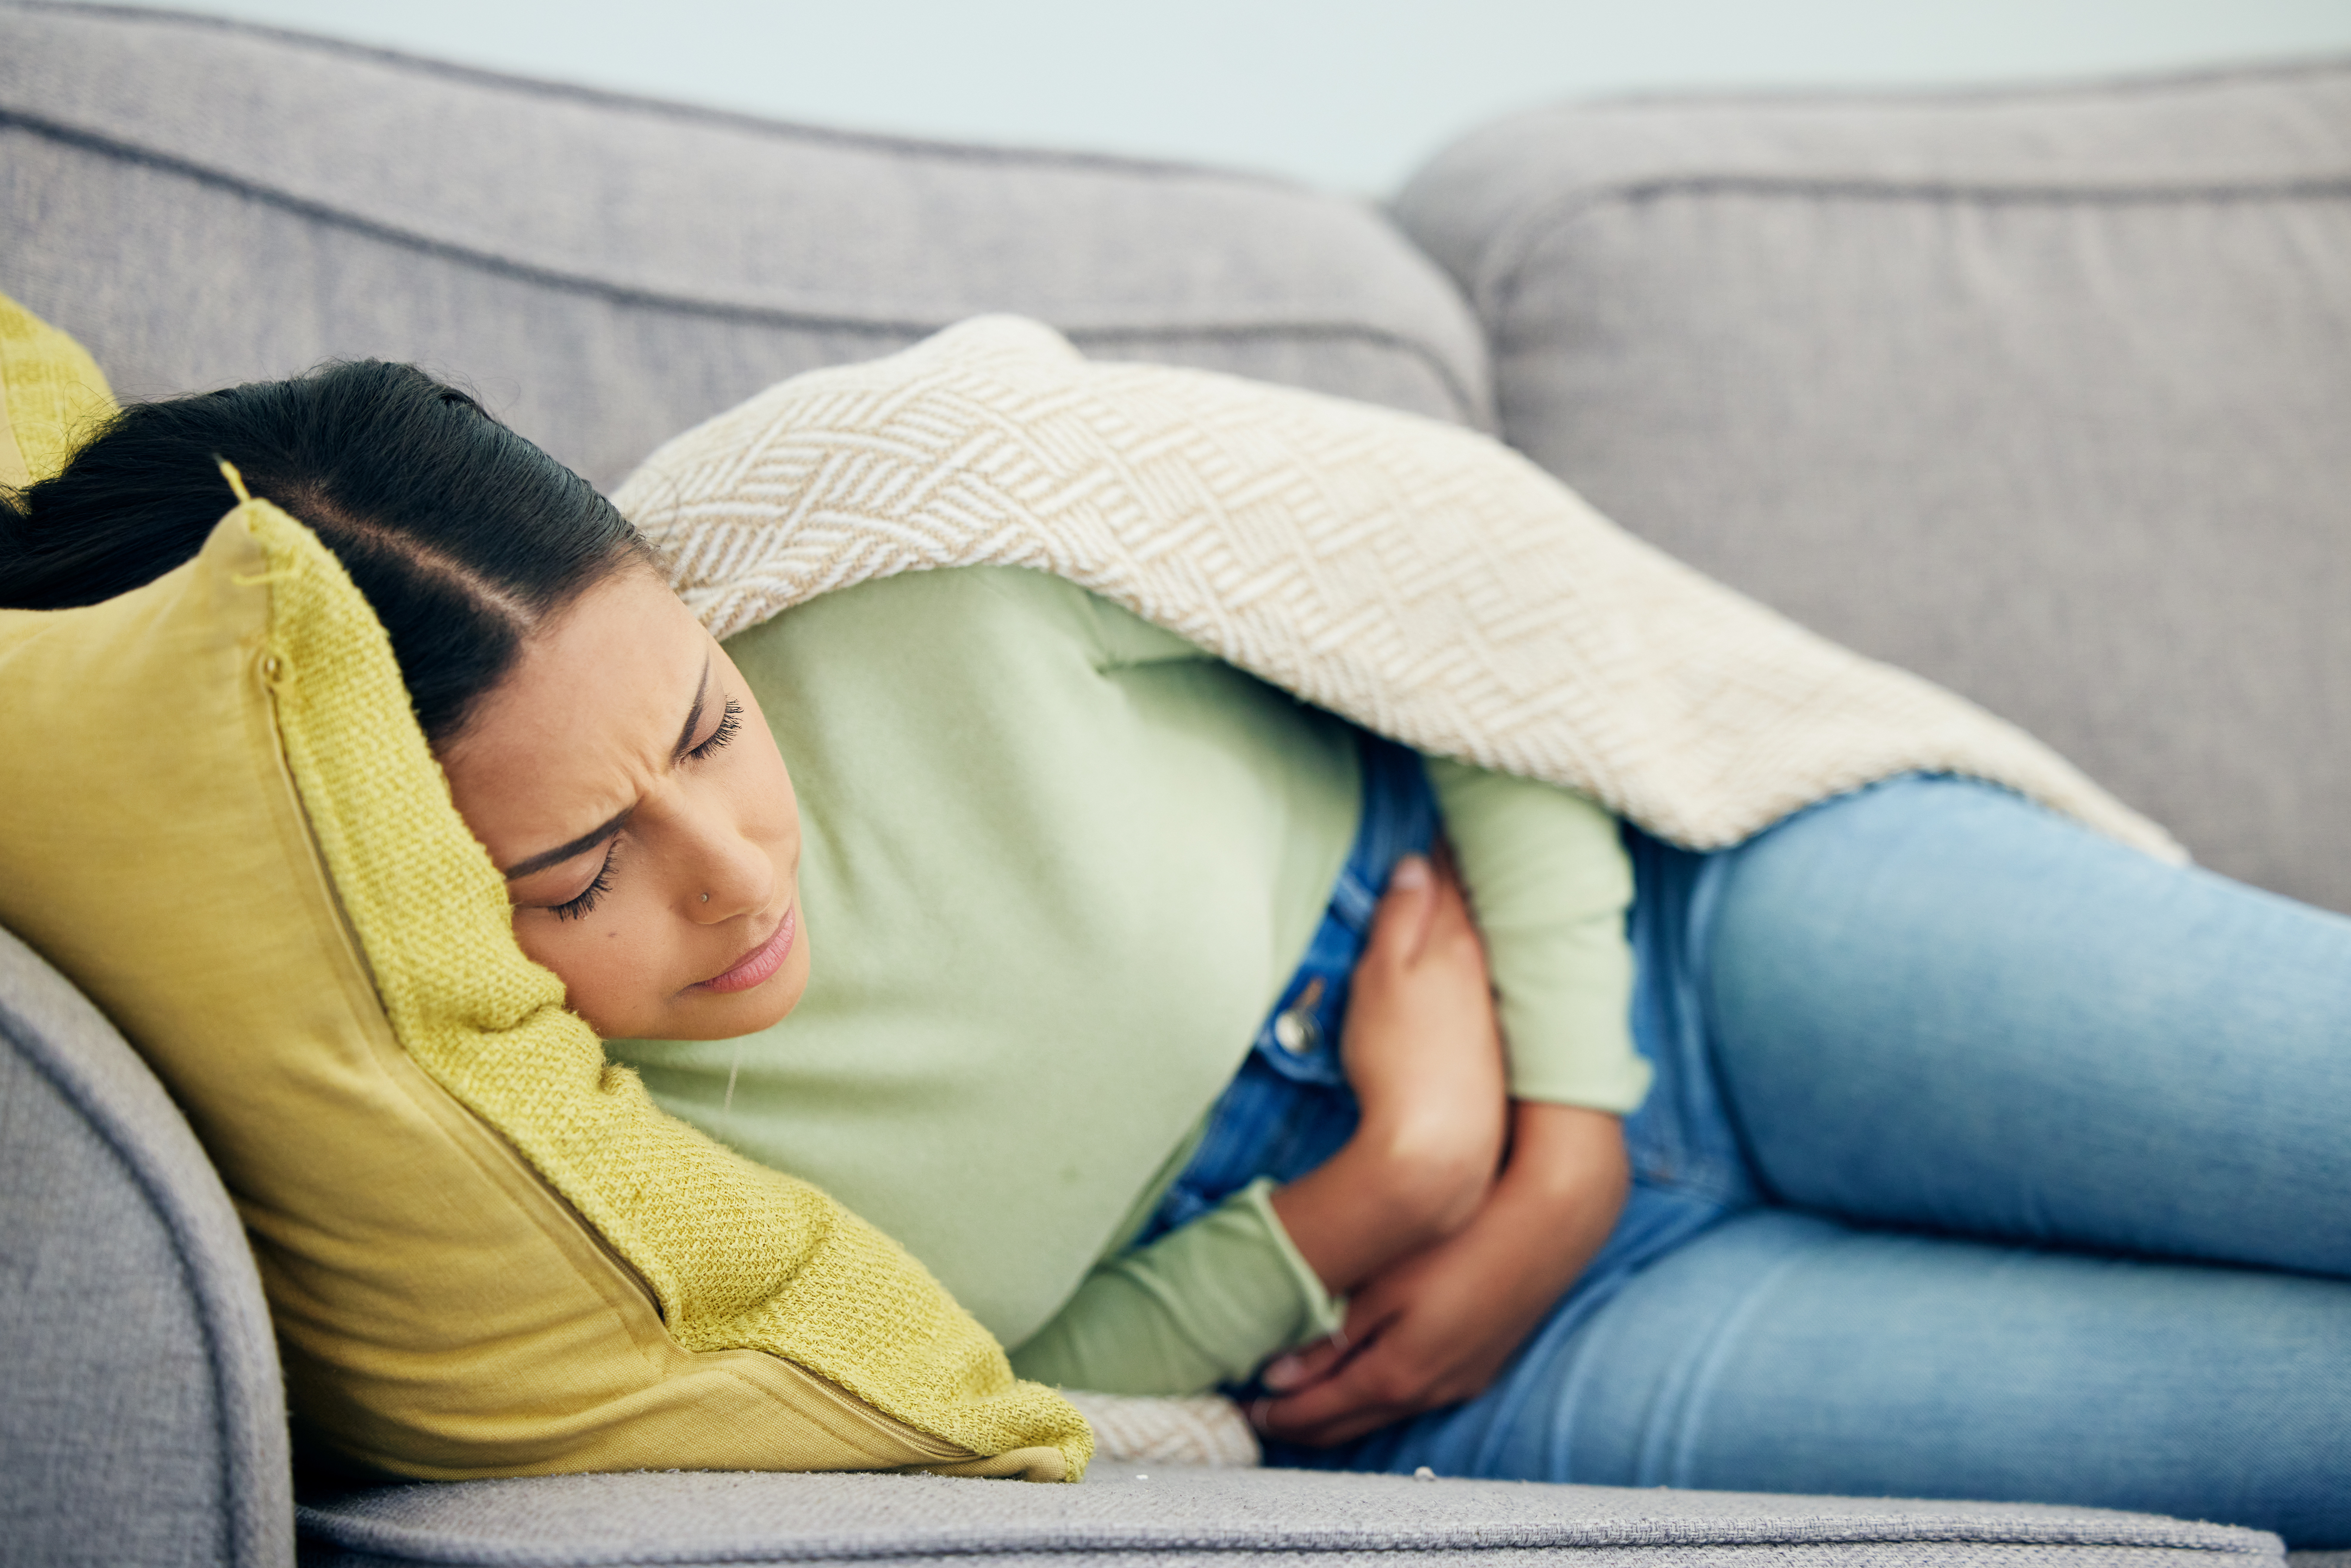 Causes of abdominal pain